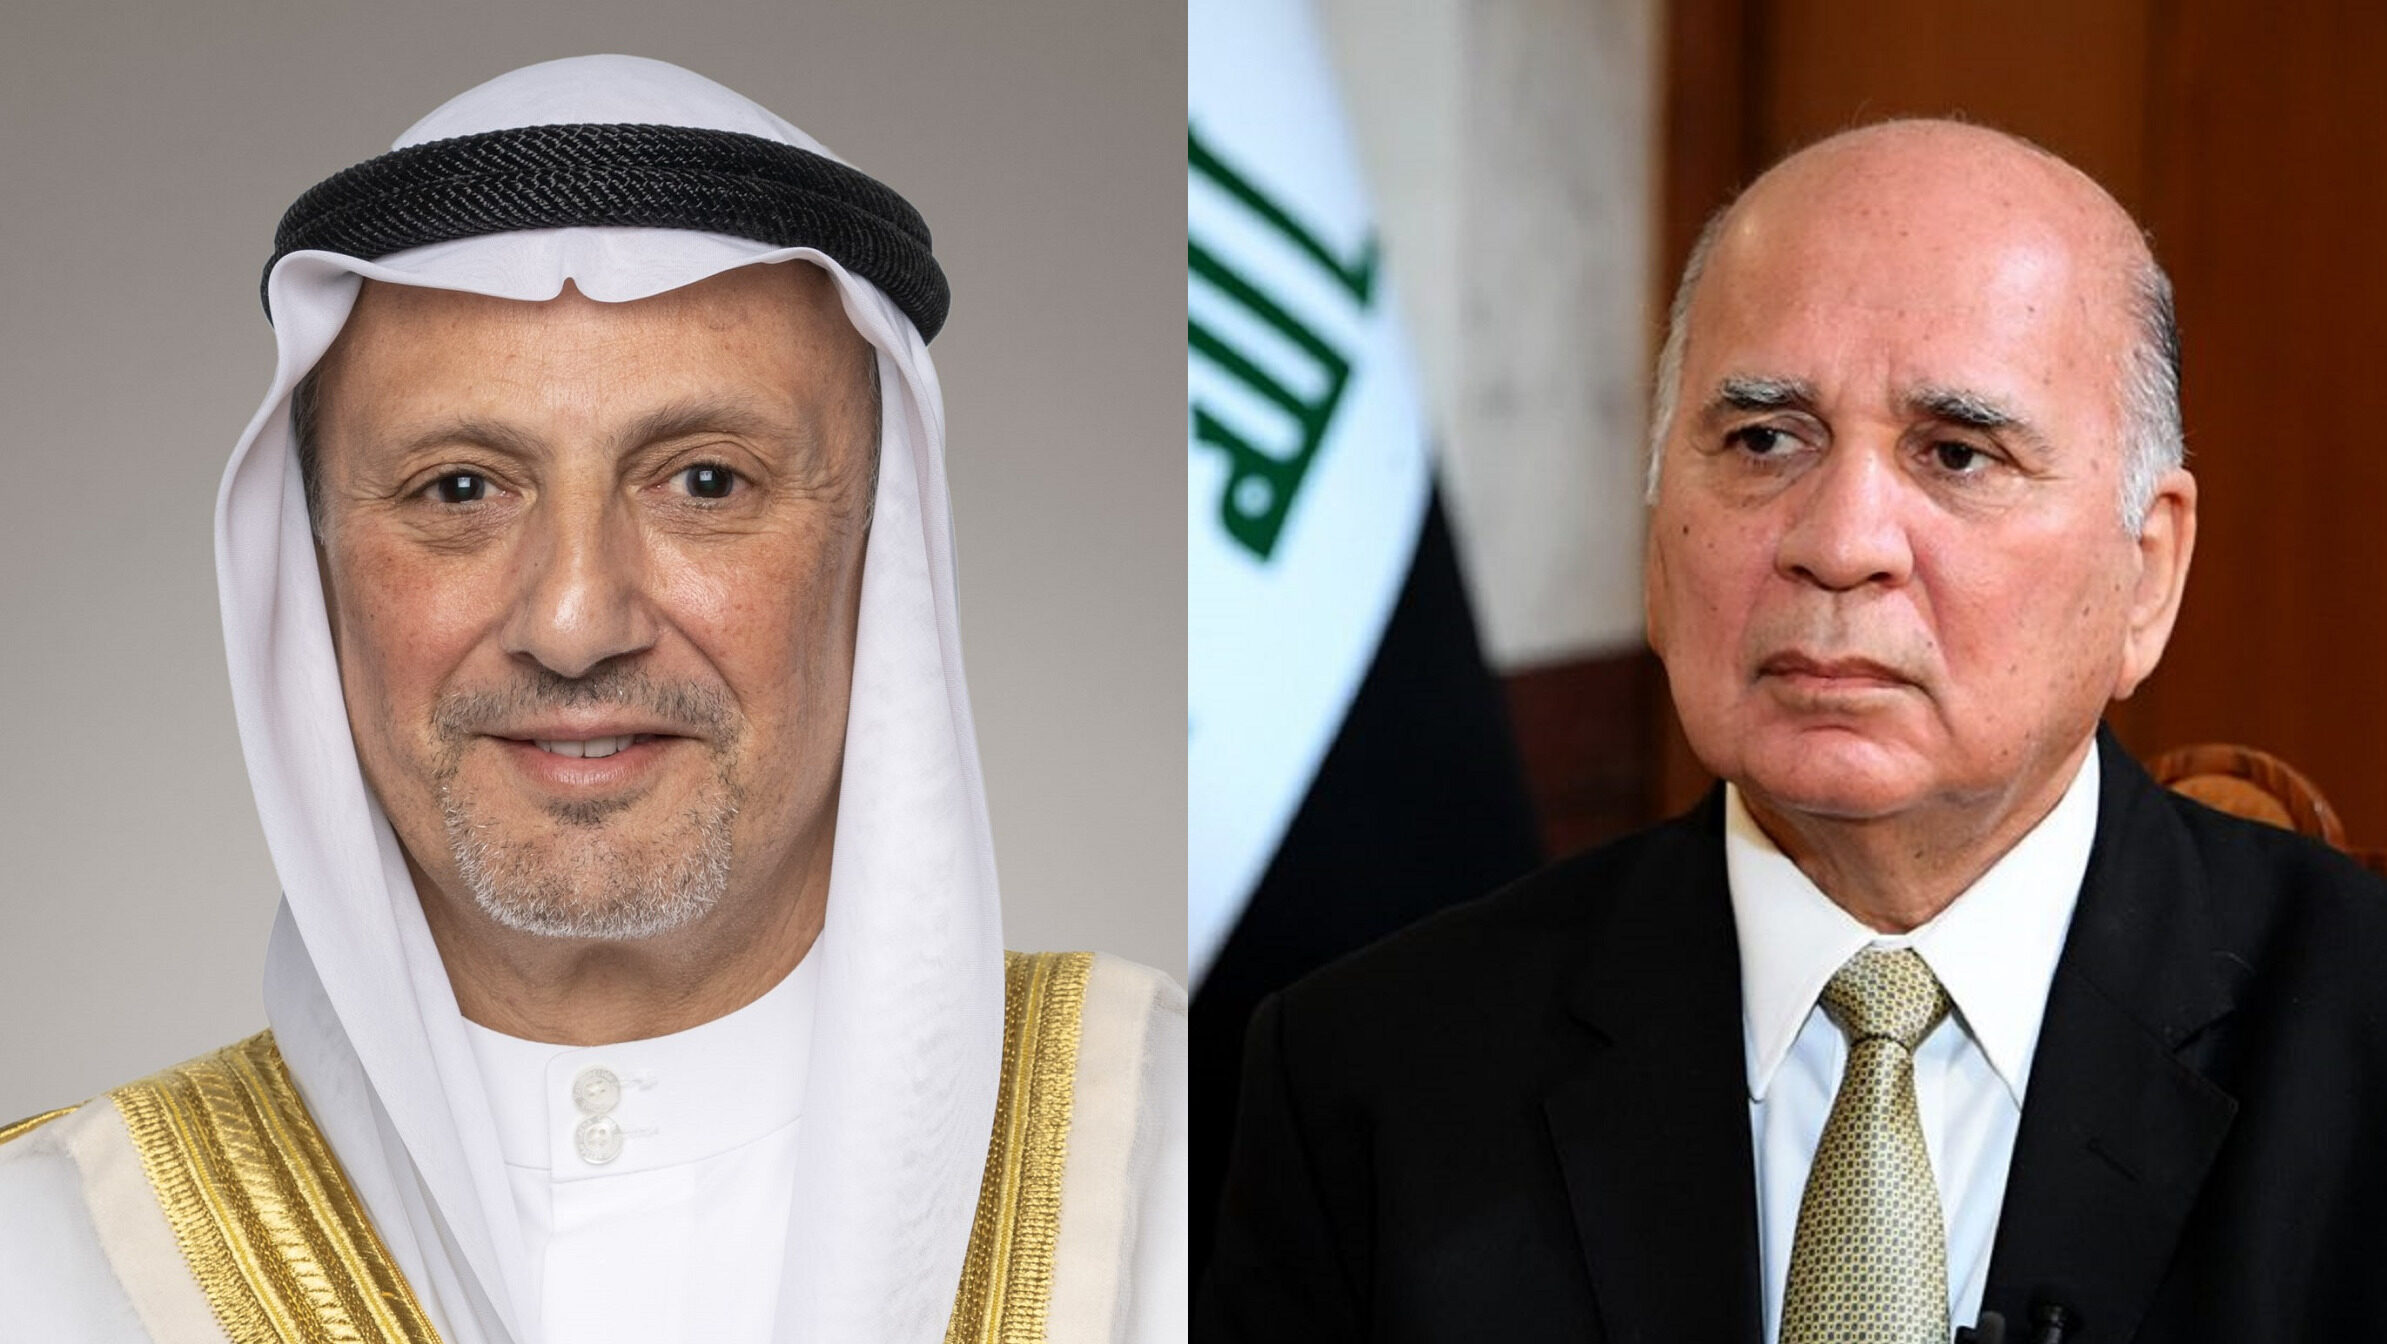 Kuwaiti Foreign Minister Visits Iraq To Resolve Border Disputes